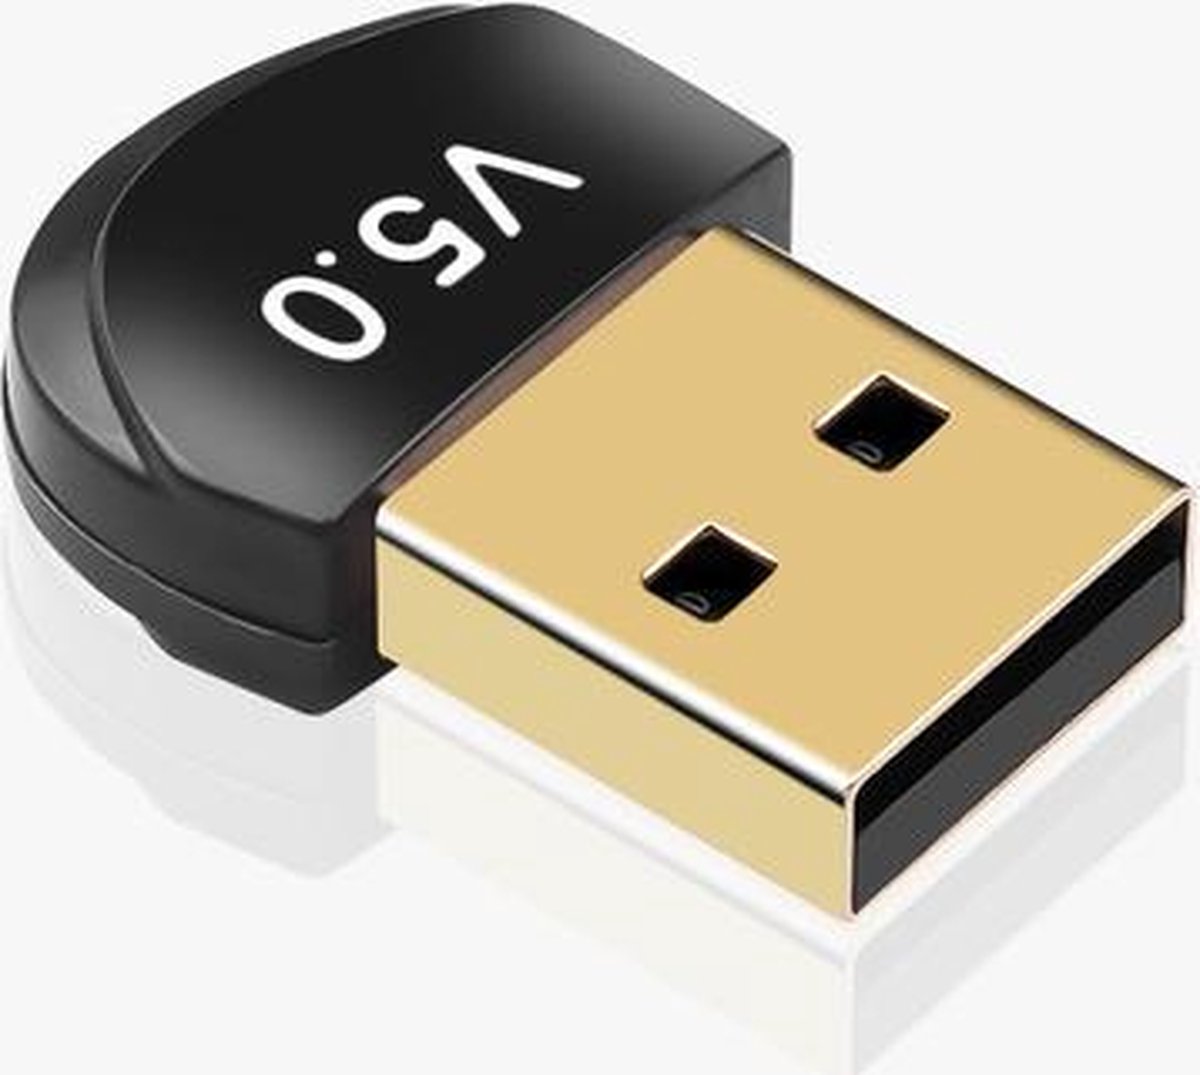 bluetooth adapter for pc windows 10 free download